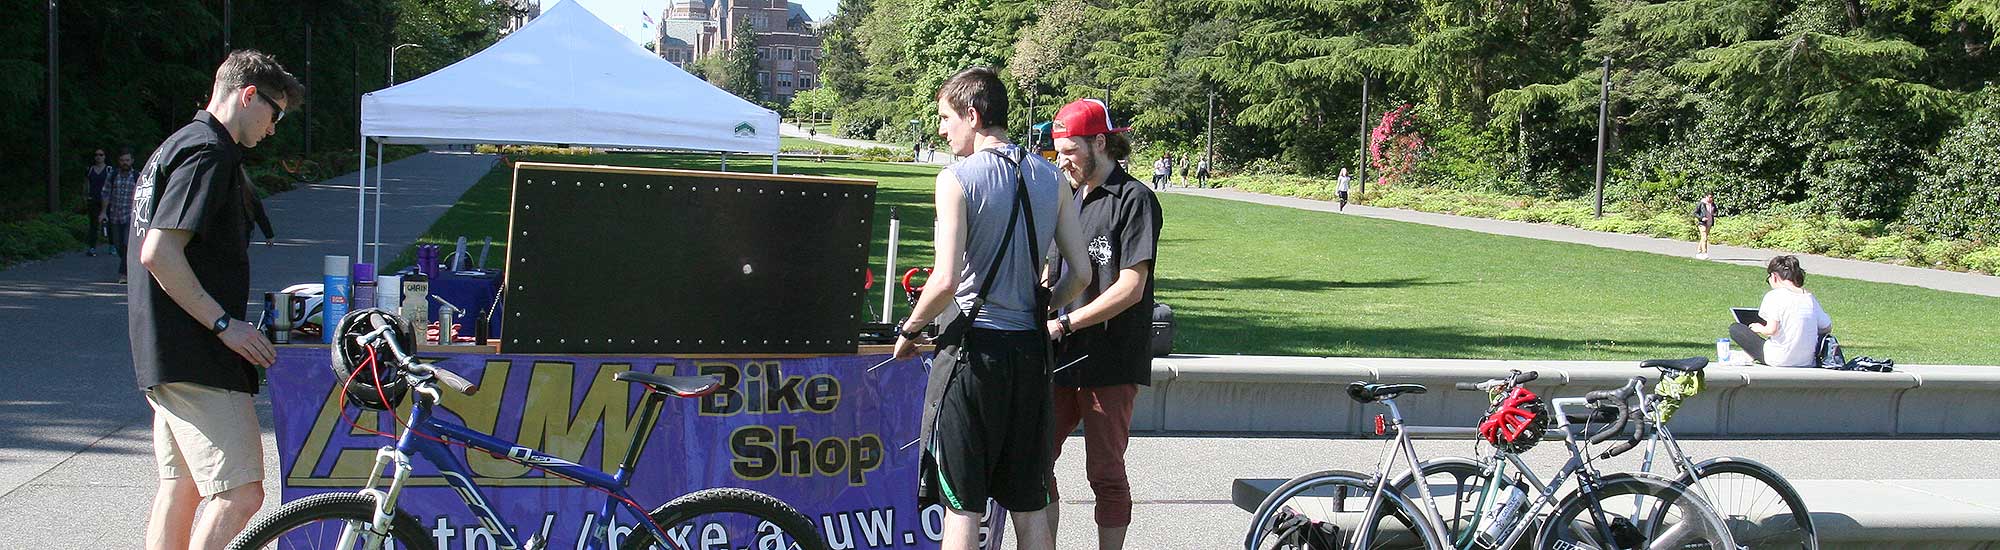 ASUW bicycle shop at a Trailside Afternoons event